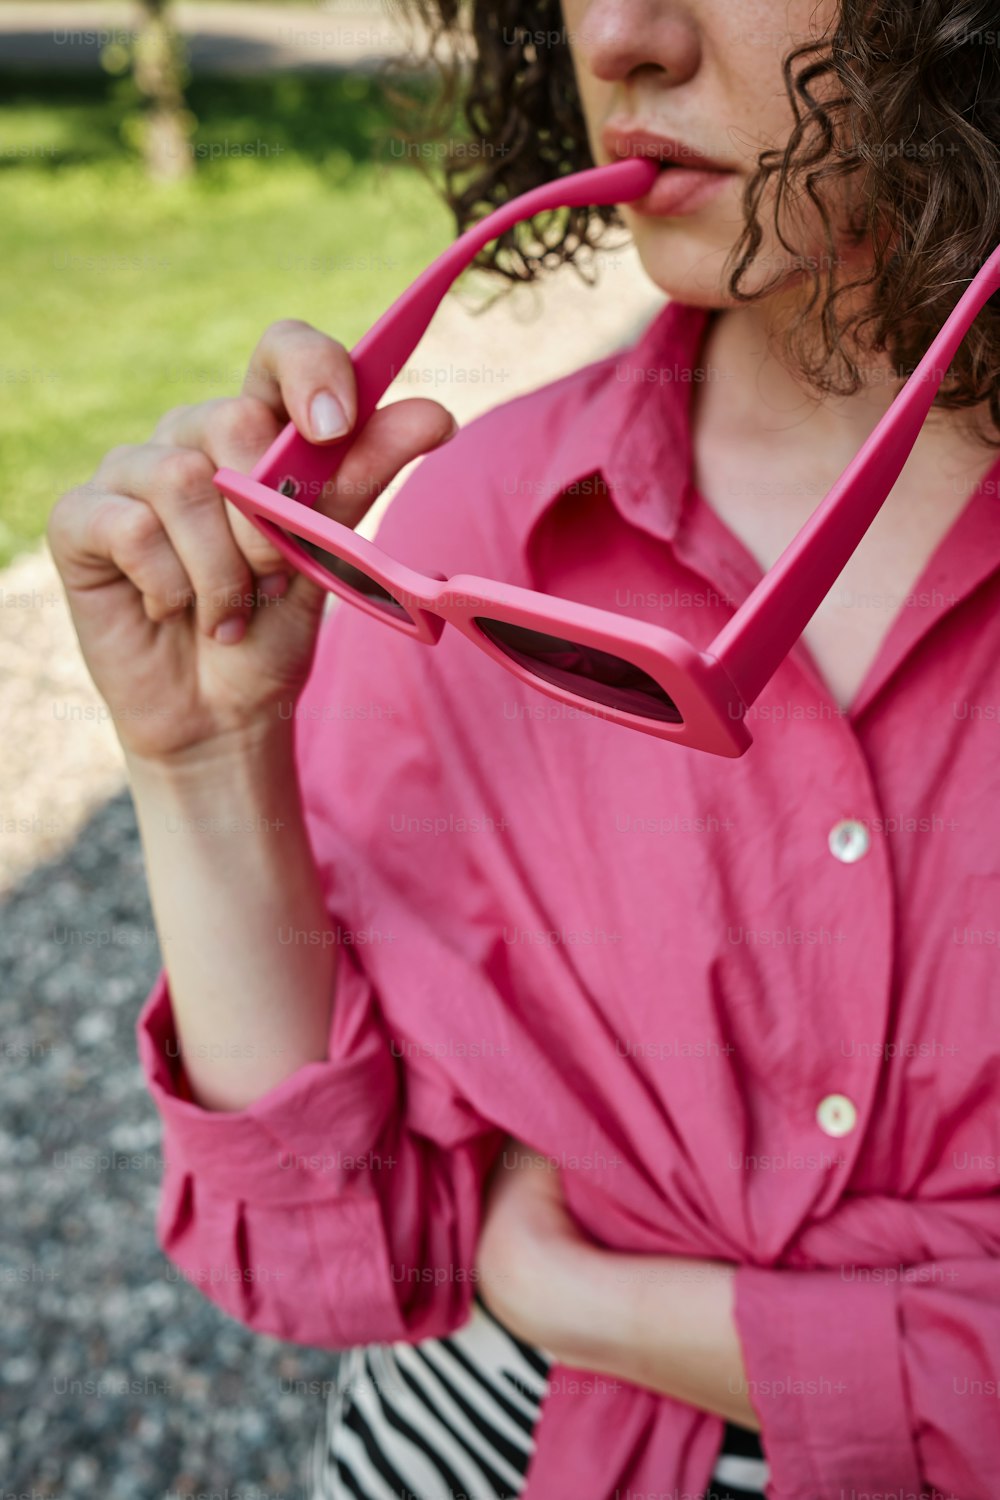 a woman in a pink shirt is holding a pair of pink glasses